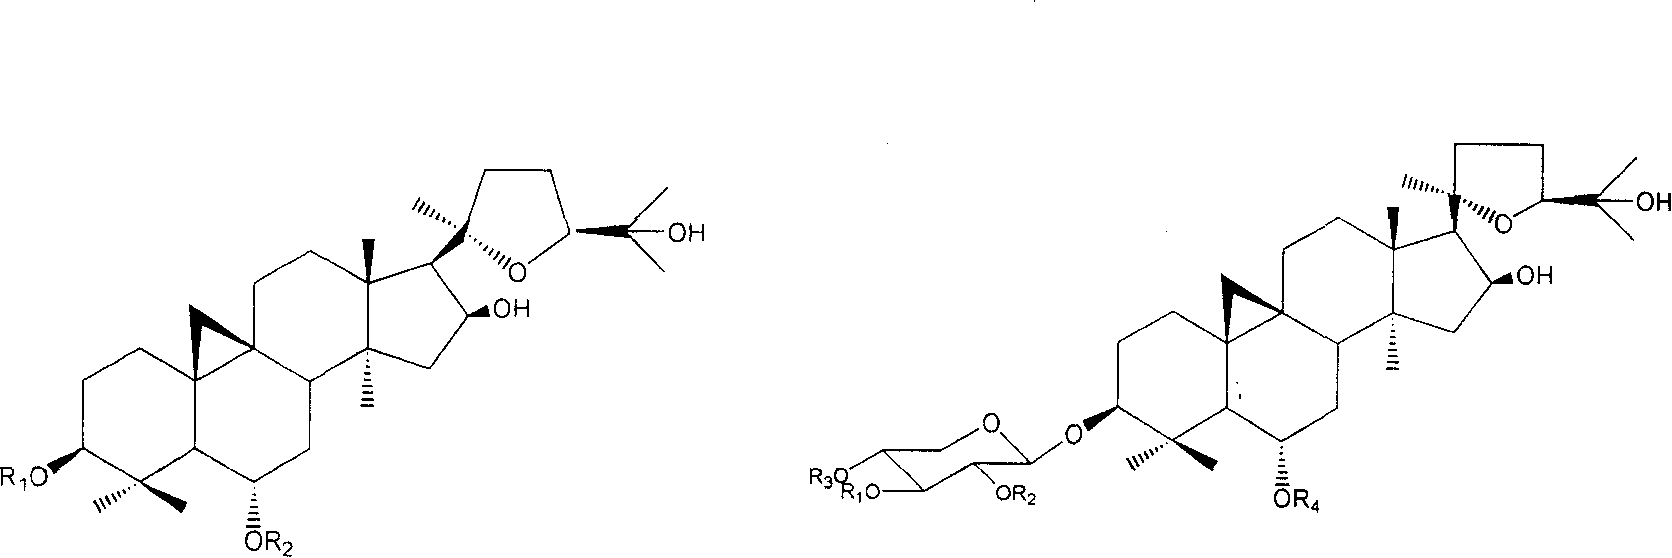 Derivative of cyclo membranousol kind and application thereof